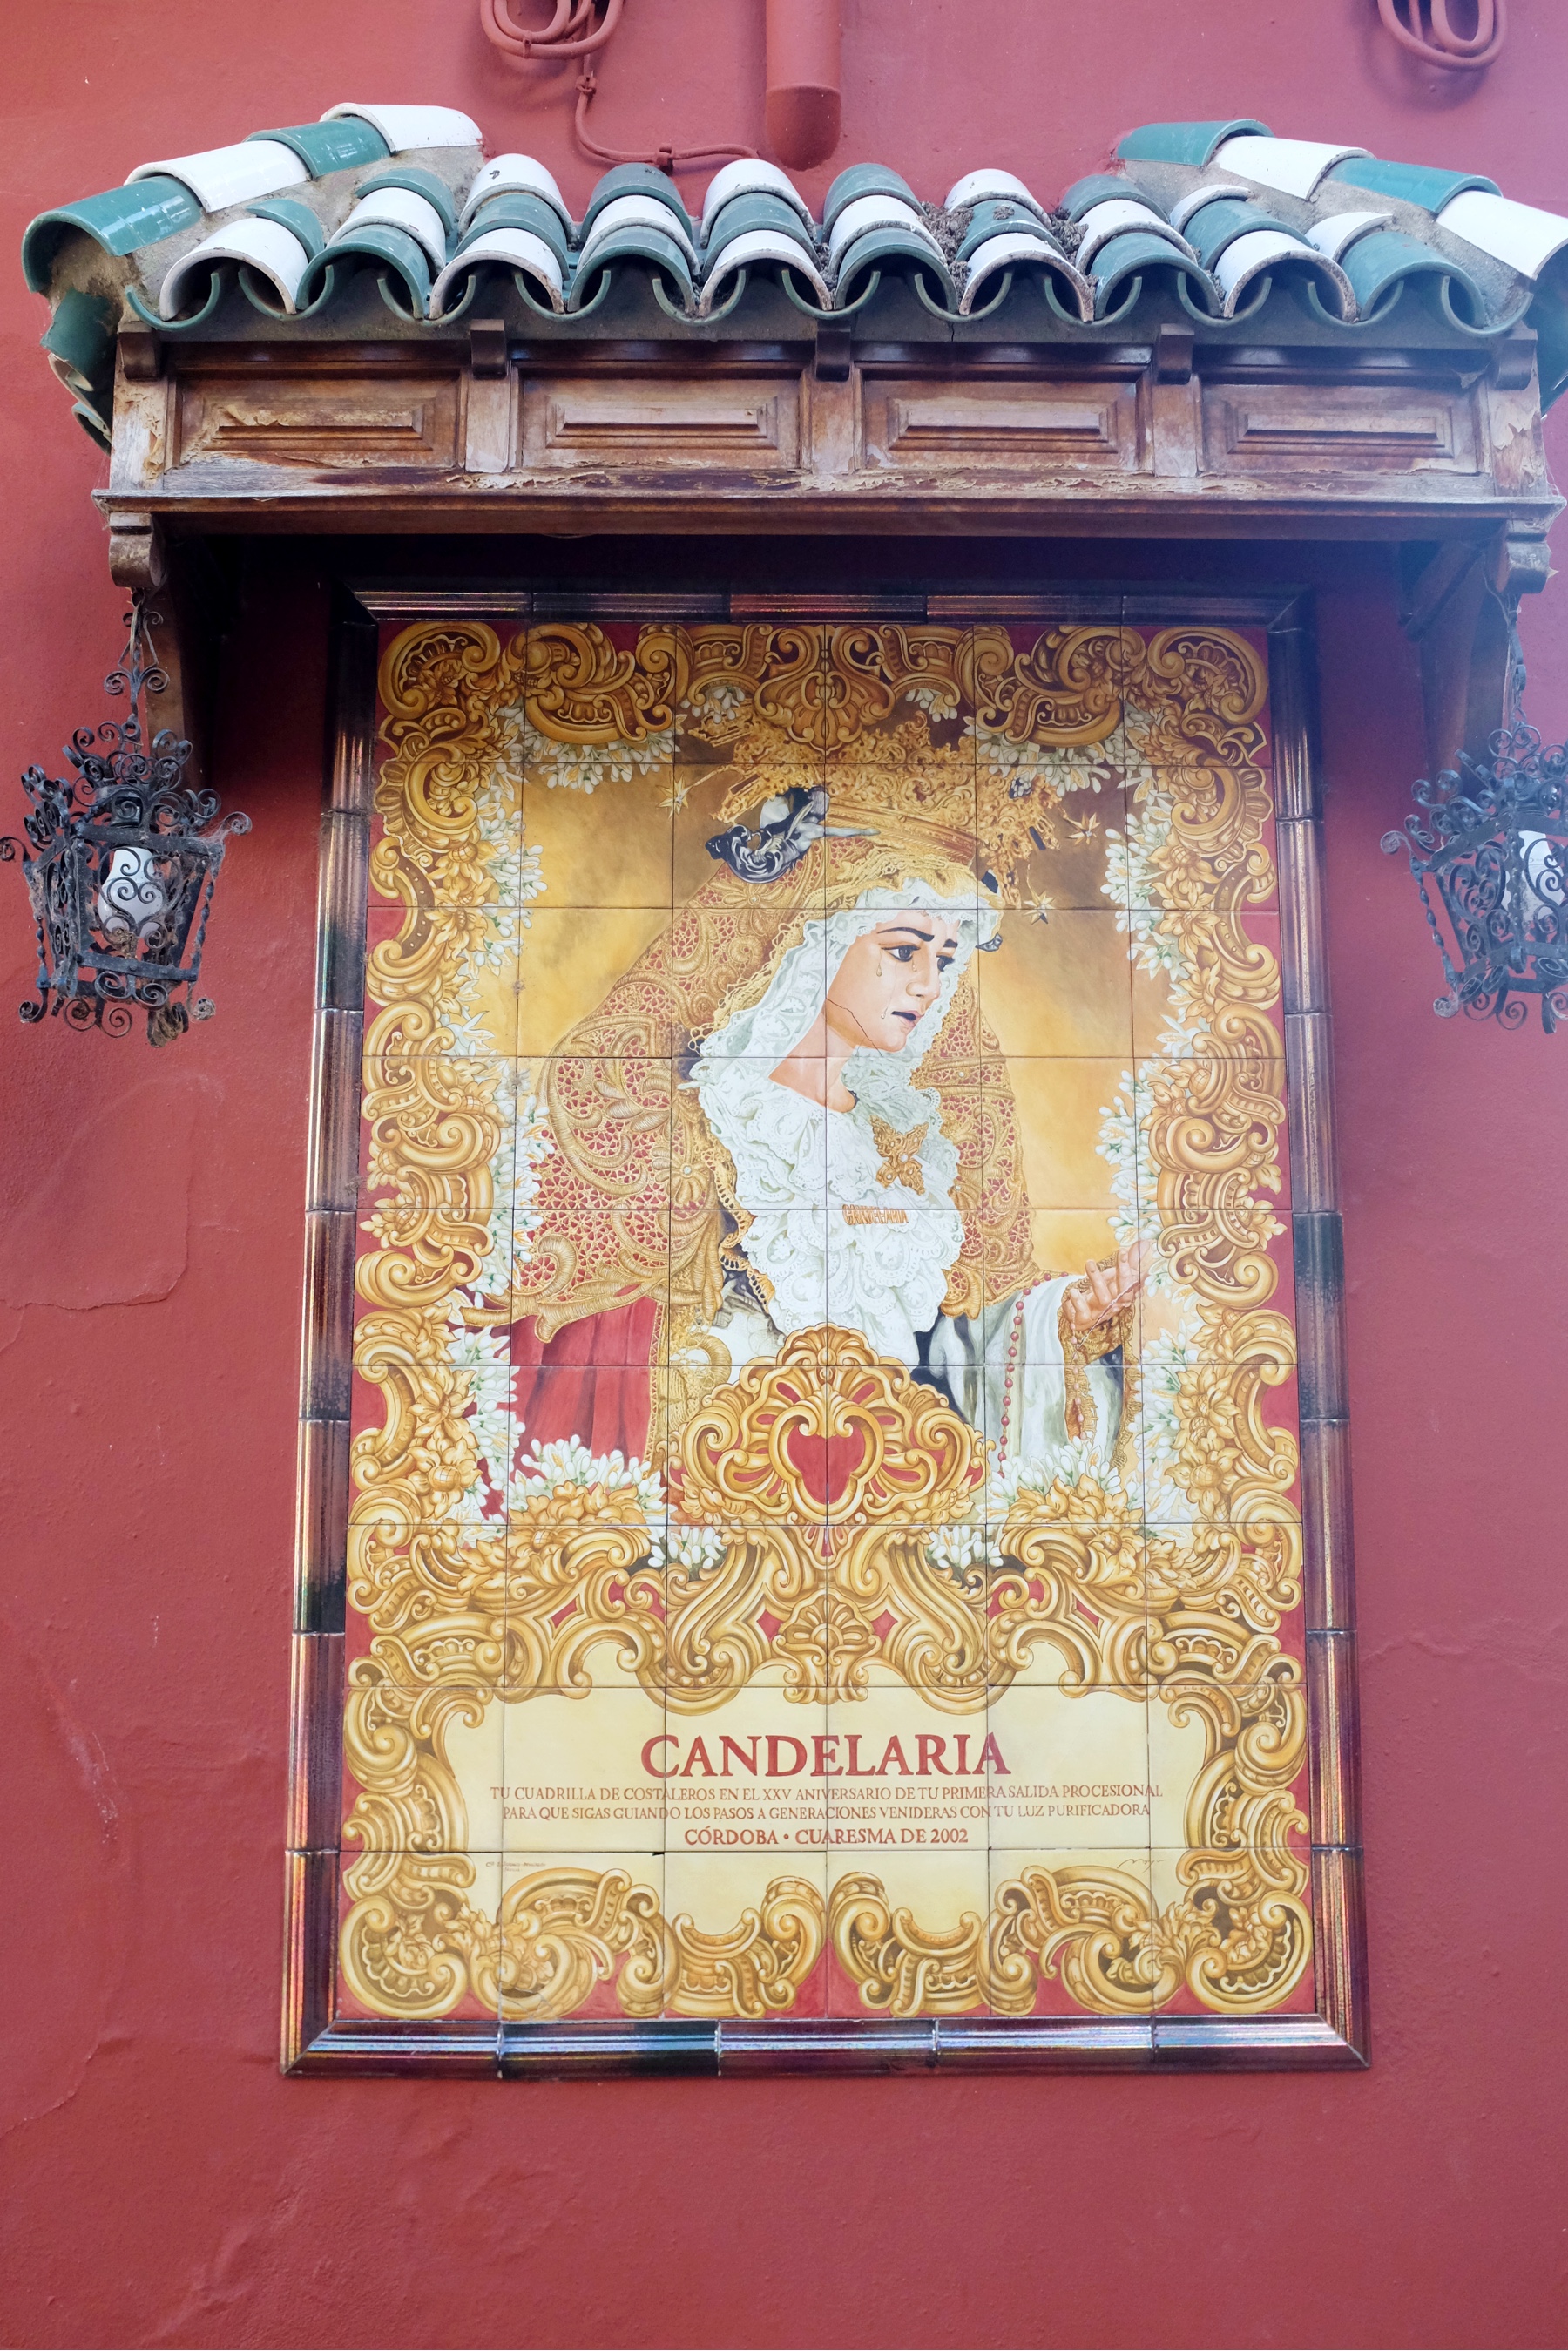 House Museums & The Hippie House in Córdoba